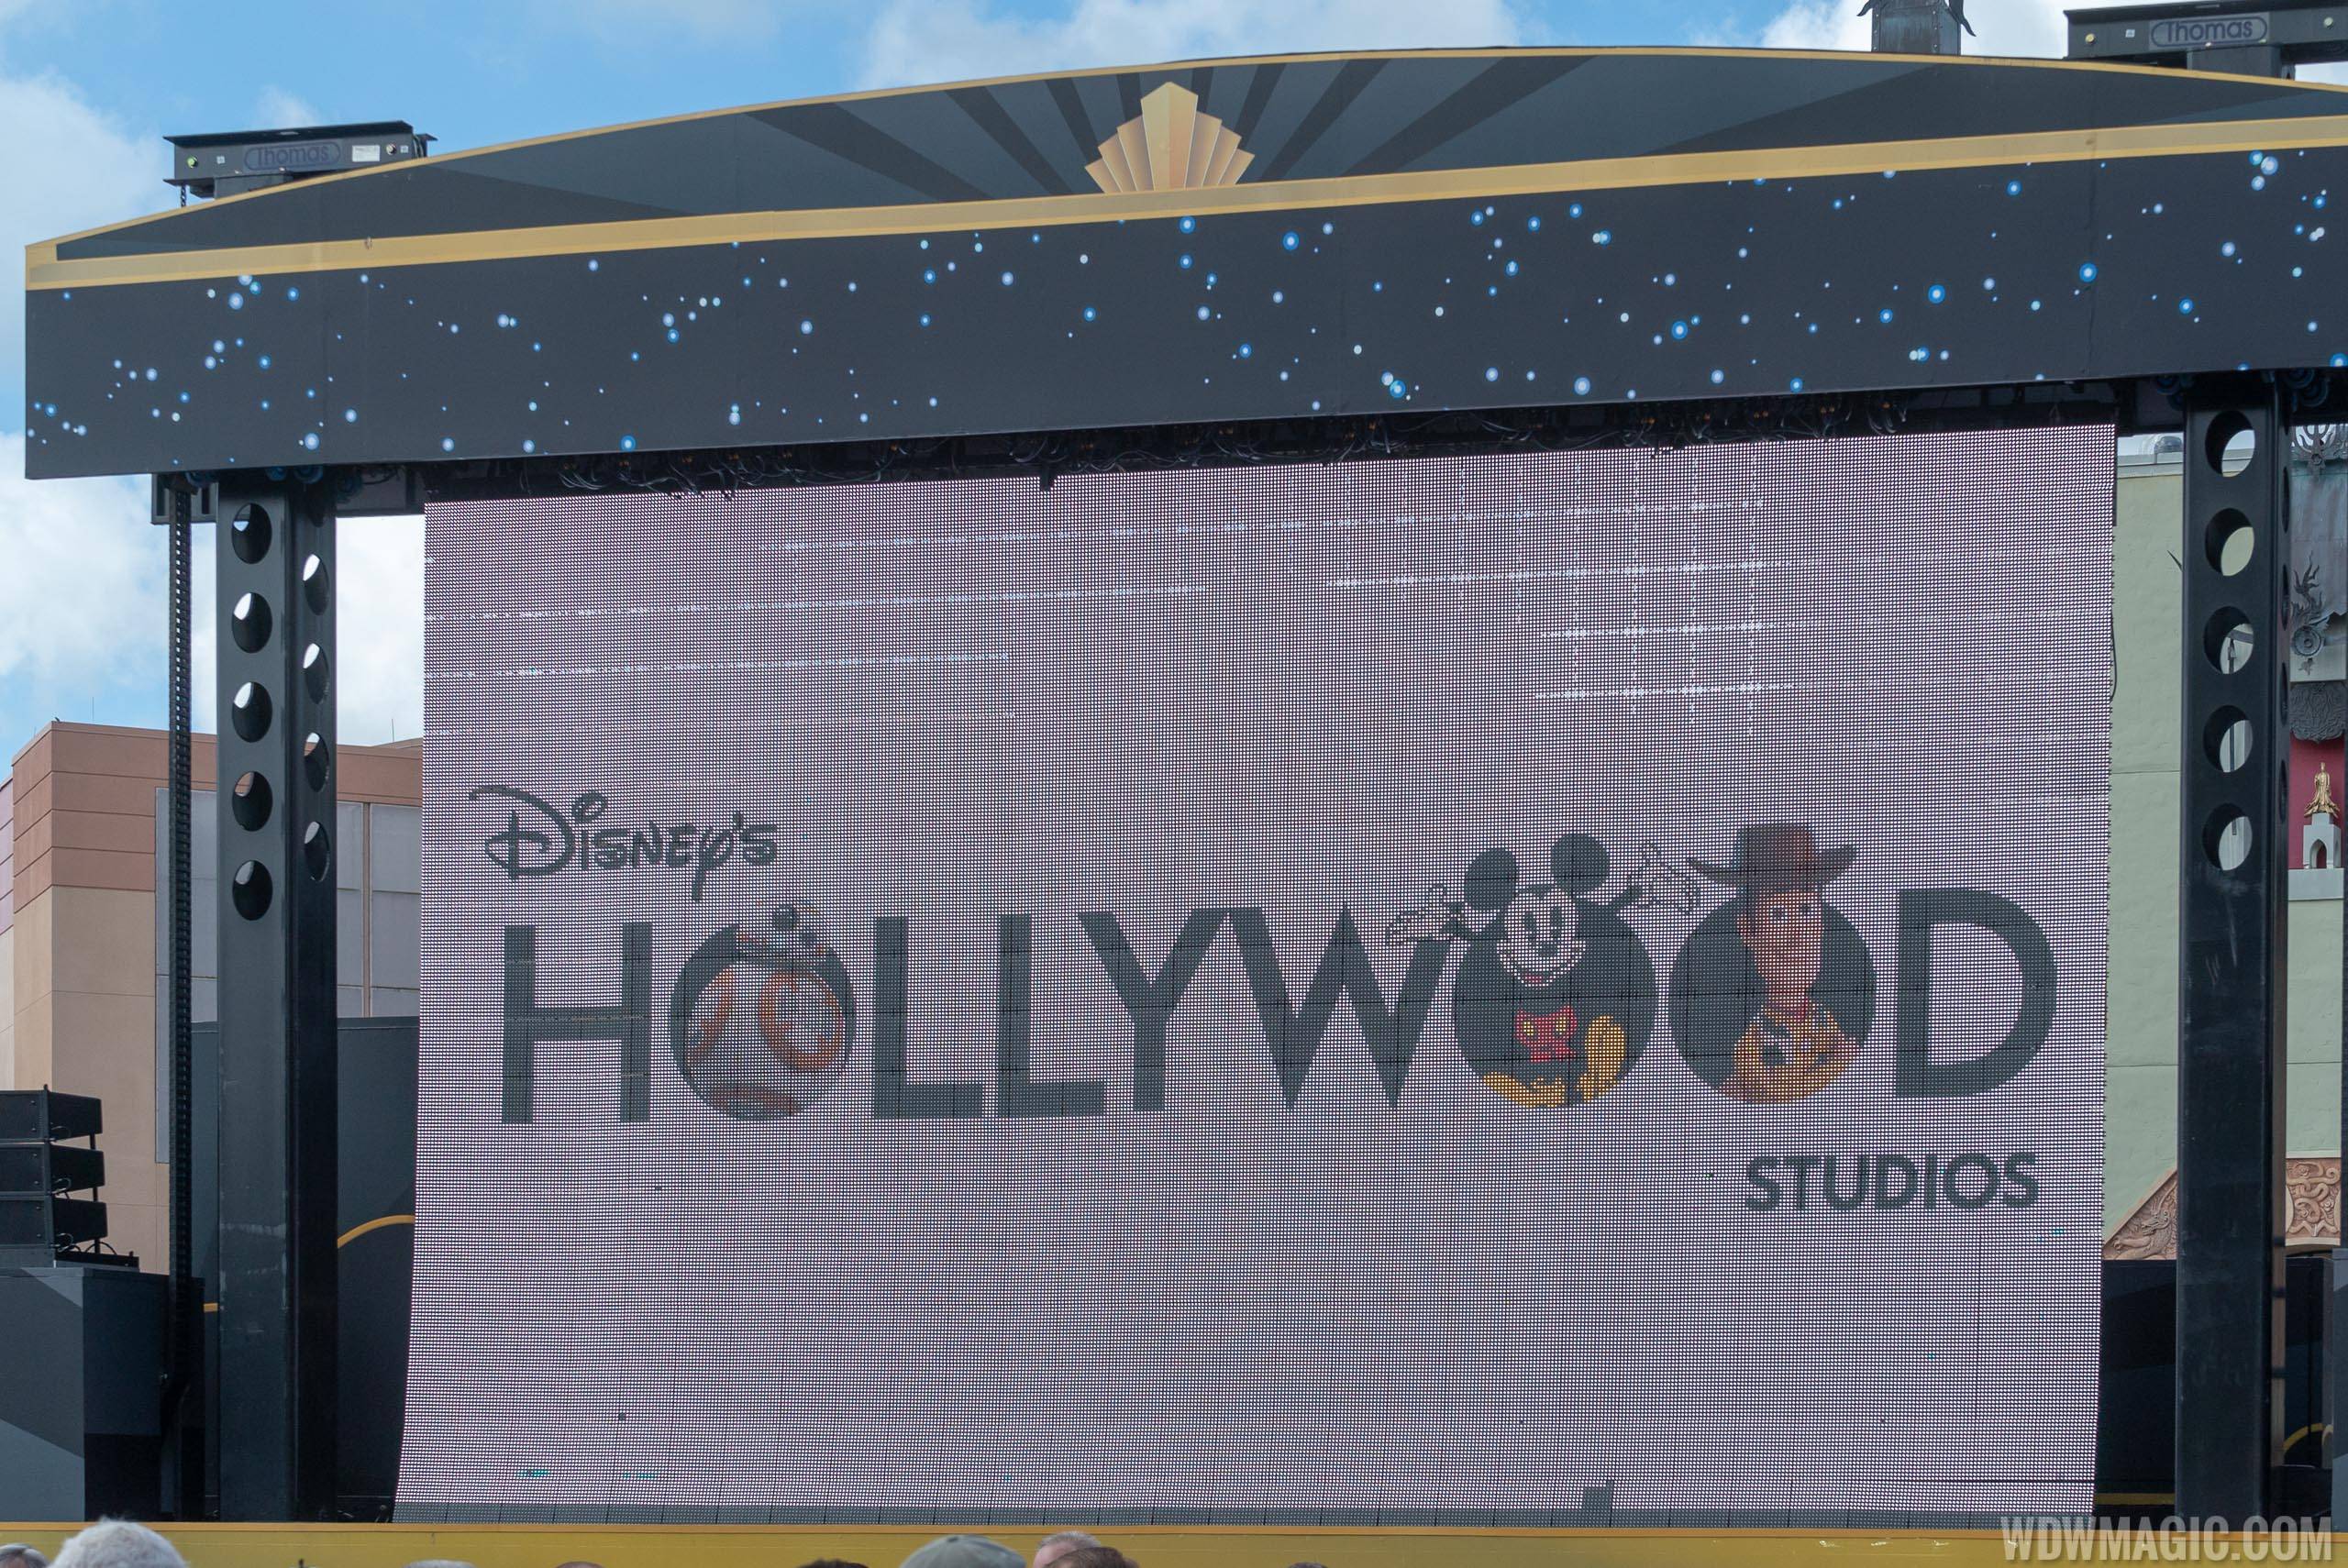 New logo for Disney's Hollywood Studios on-screen during the 30th anniversary moment today